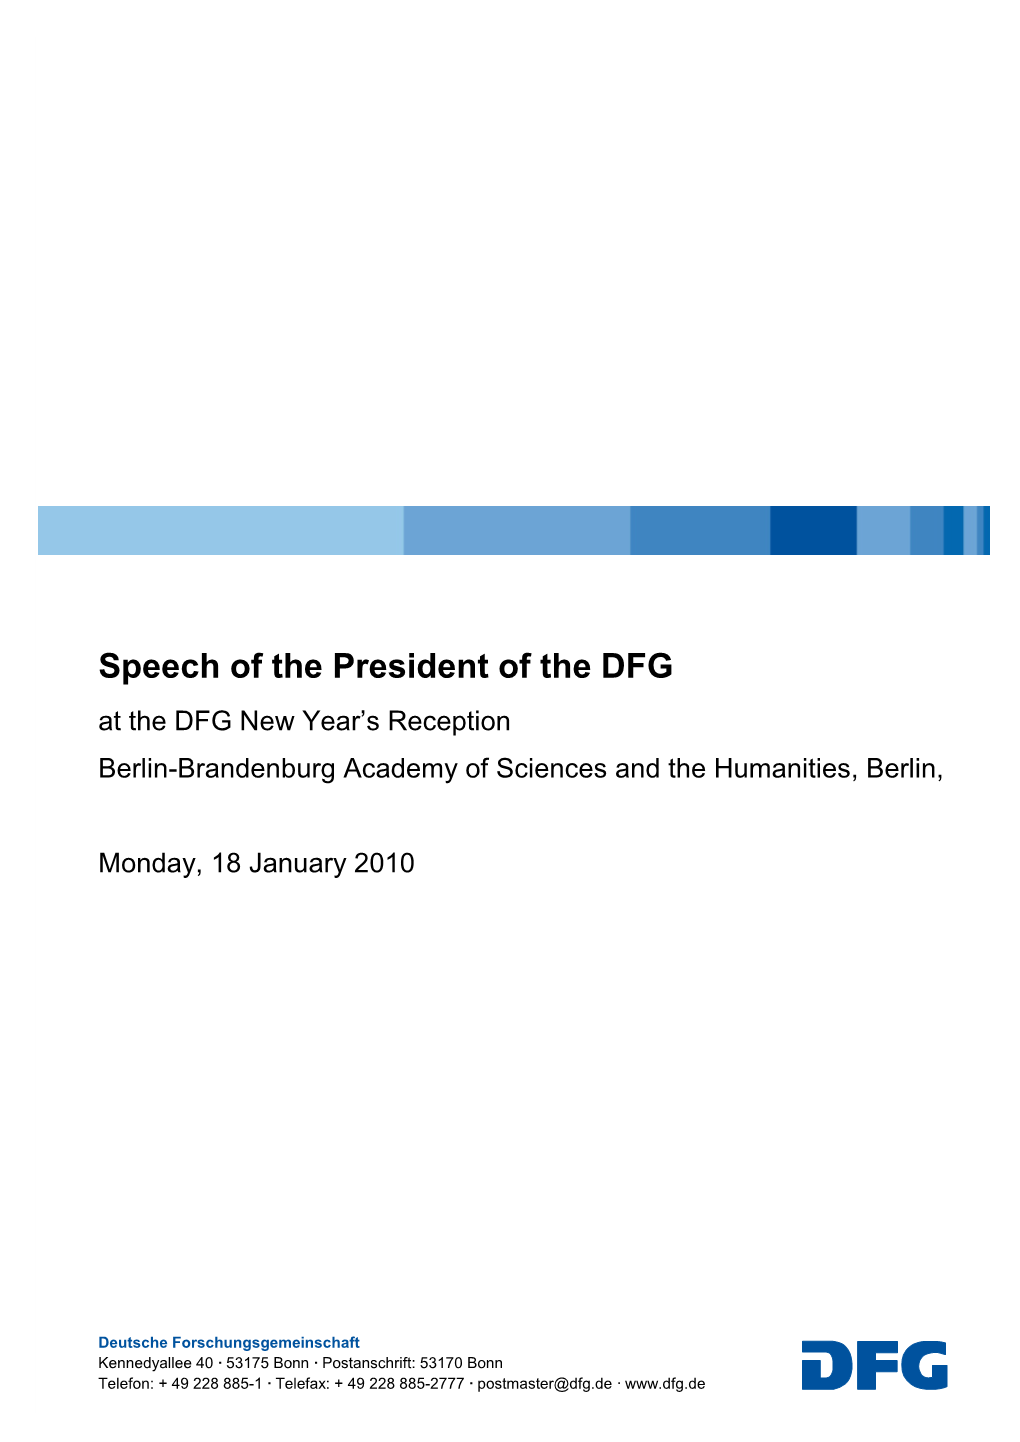 Speech of the President of the DFG, Berlin, 18 January 2010 Page 1 / 11